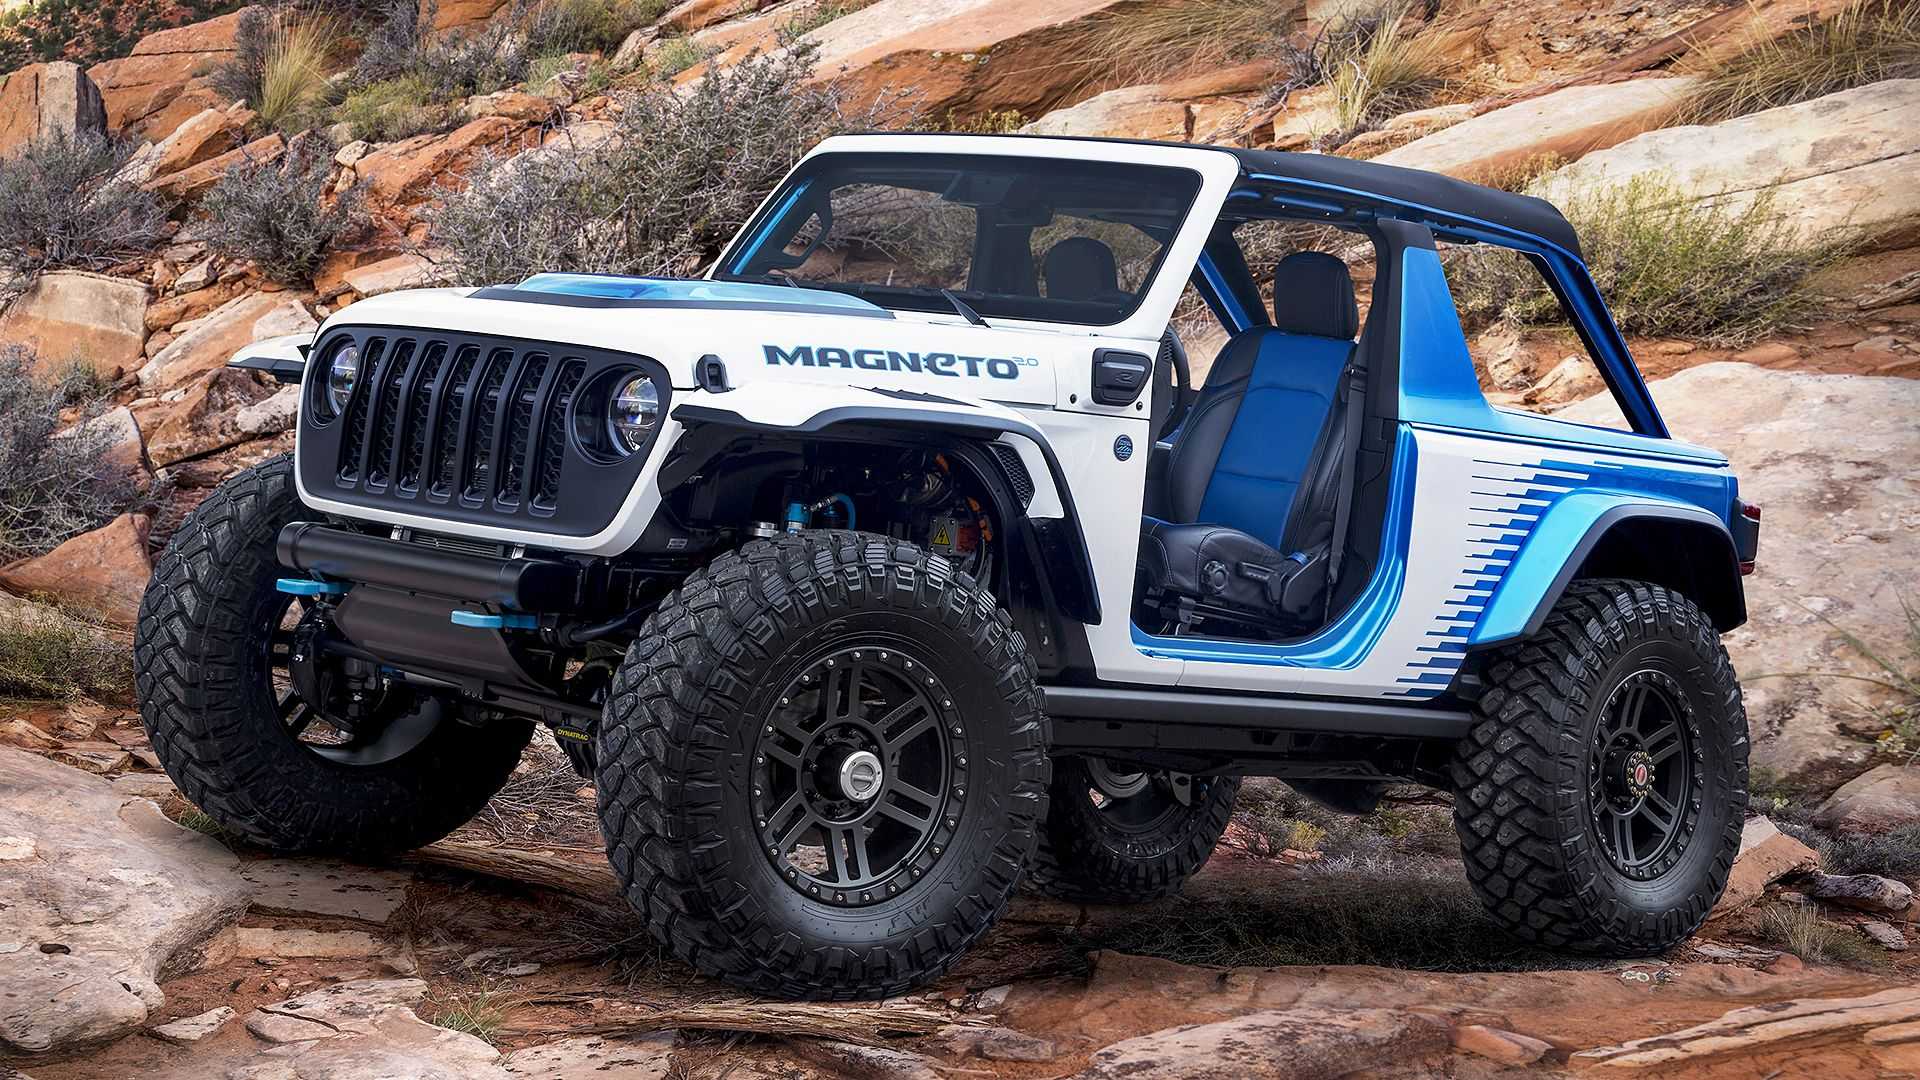 Jeep updates Magneto concept for one-pedal off-roading, quicker acceleration